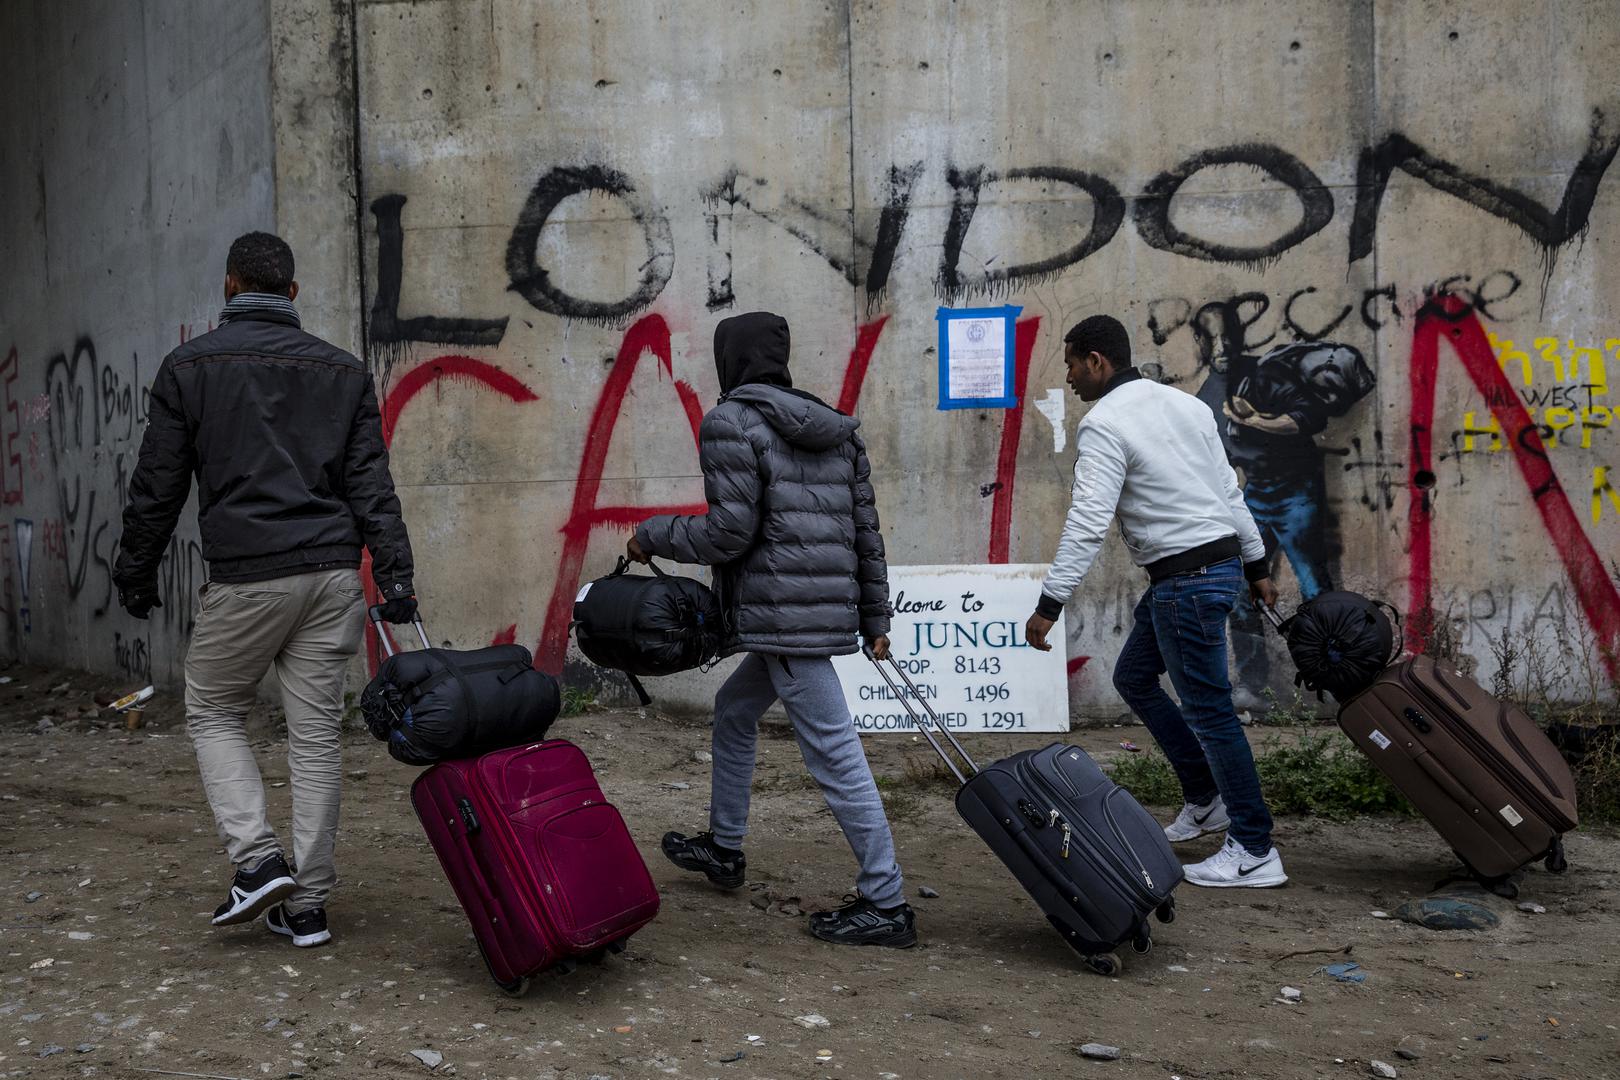 France Stop Ethnic Profiling, Protect Asylum Seekers' Rights and